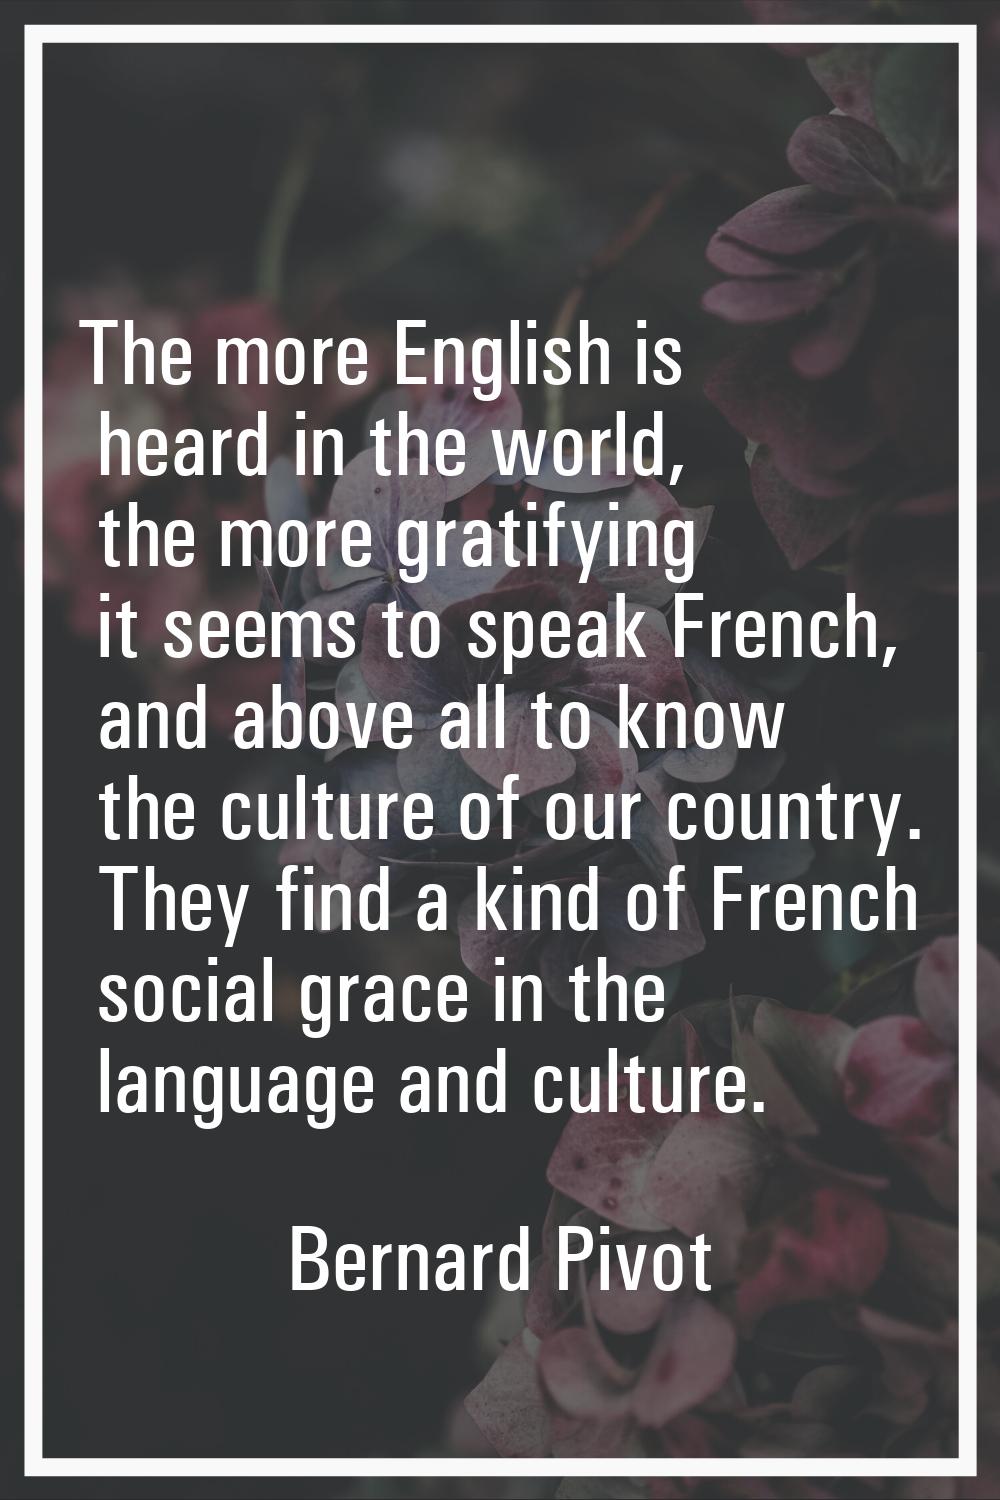 The more English is heard in the world, the more gratifying it seems to speak French, and above all